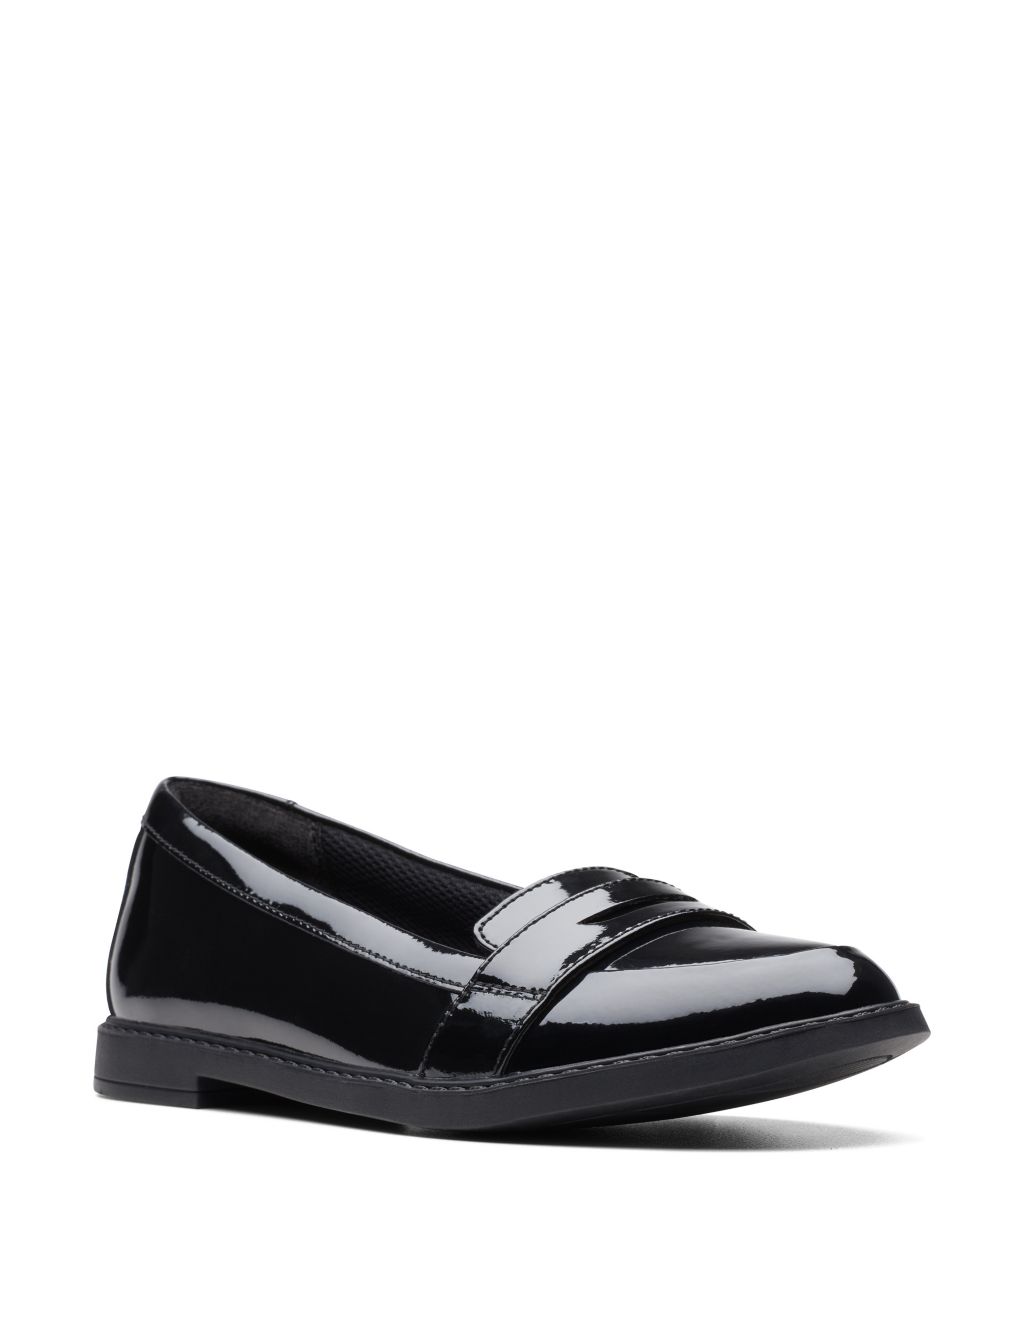 Kids' Patent Leather Slip-On Loafers (3 Small - 8 Small) | CLARKS | M&S